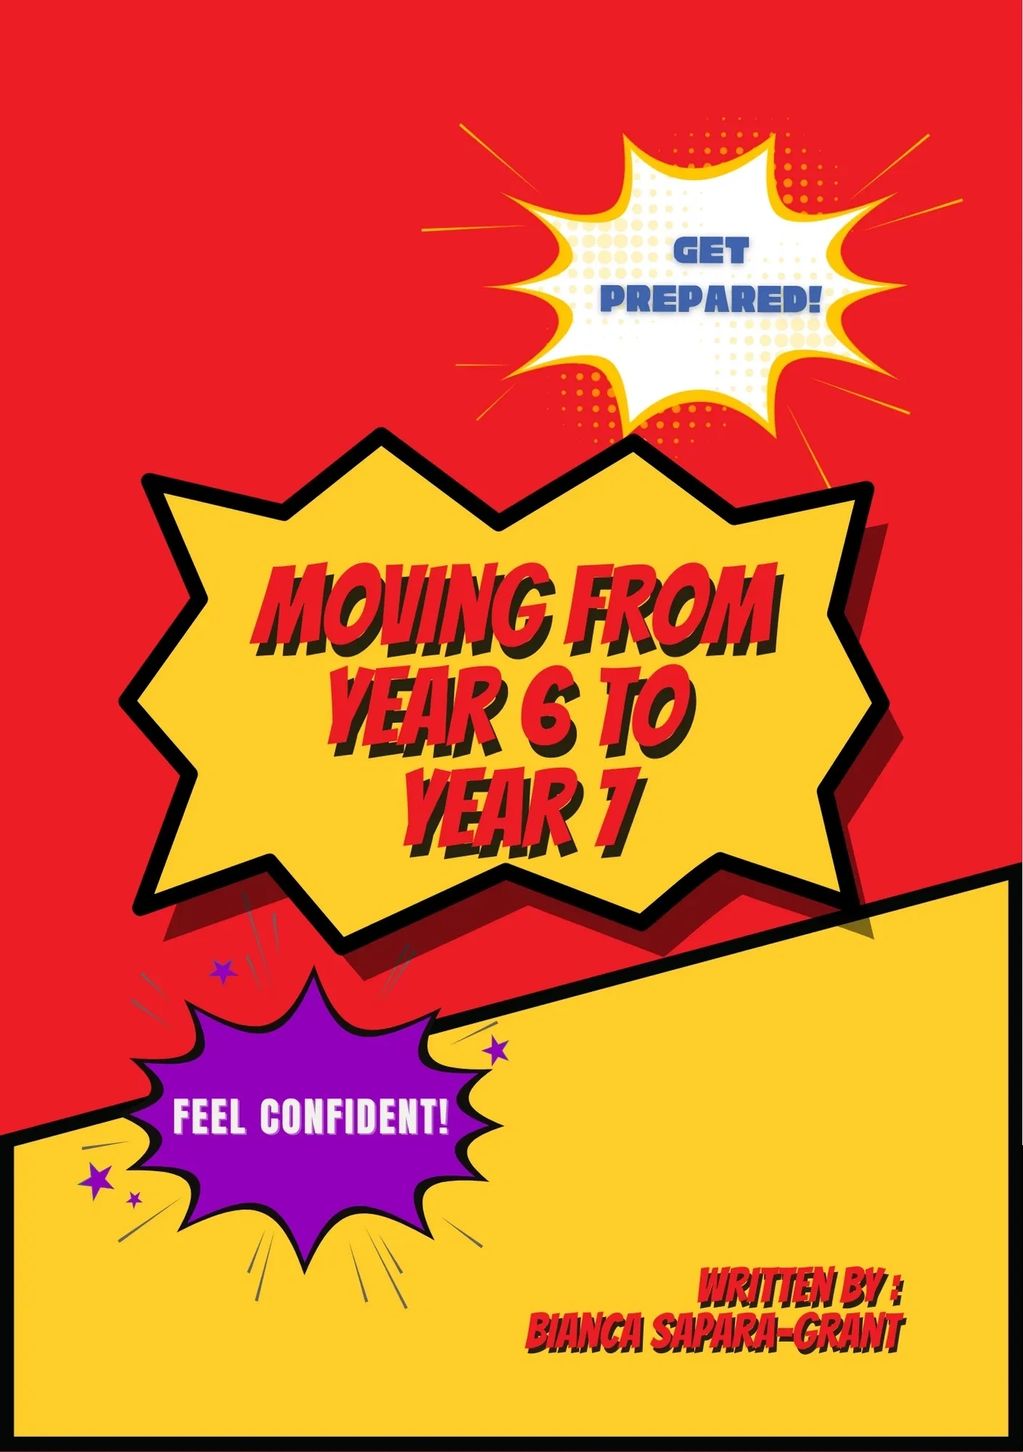 Book cover reading Moving from YEar 6 to Year 7. Get prepared! Feel confident!